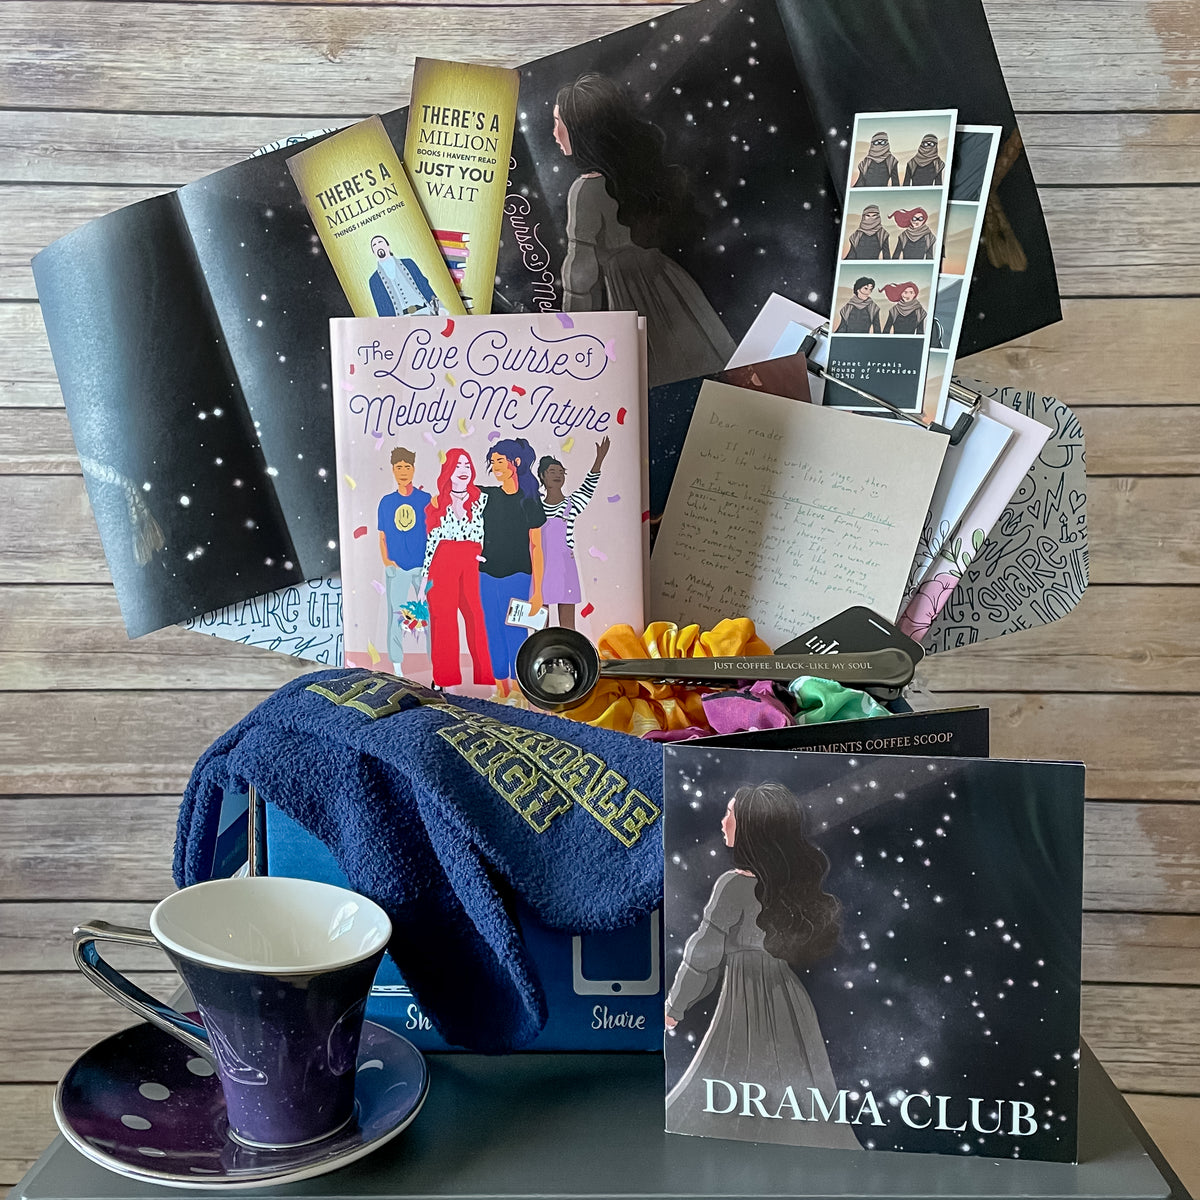 Drama Club Crate includes The Love Curse of Melody McIntyre, Clipboard, Hamilton Woodmark, Lunar Chronicles Teacup and more